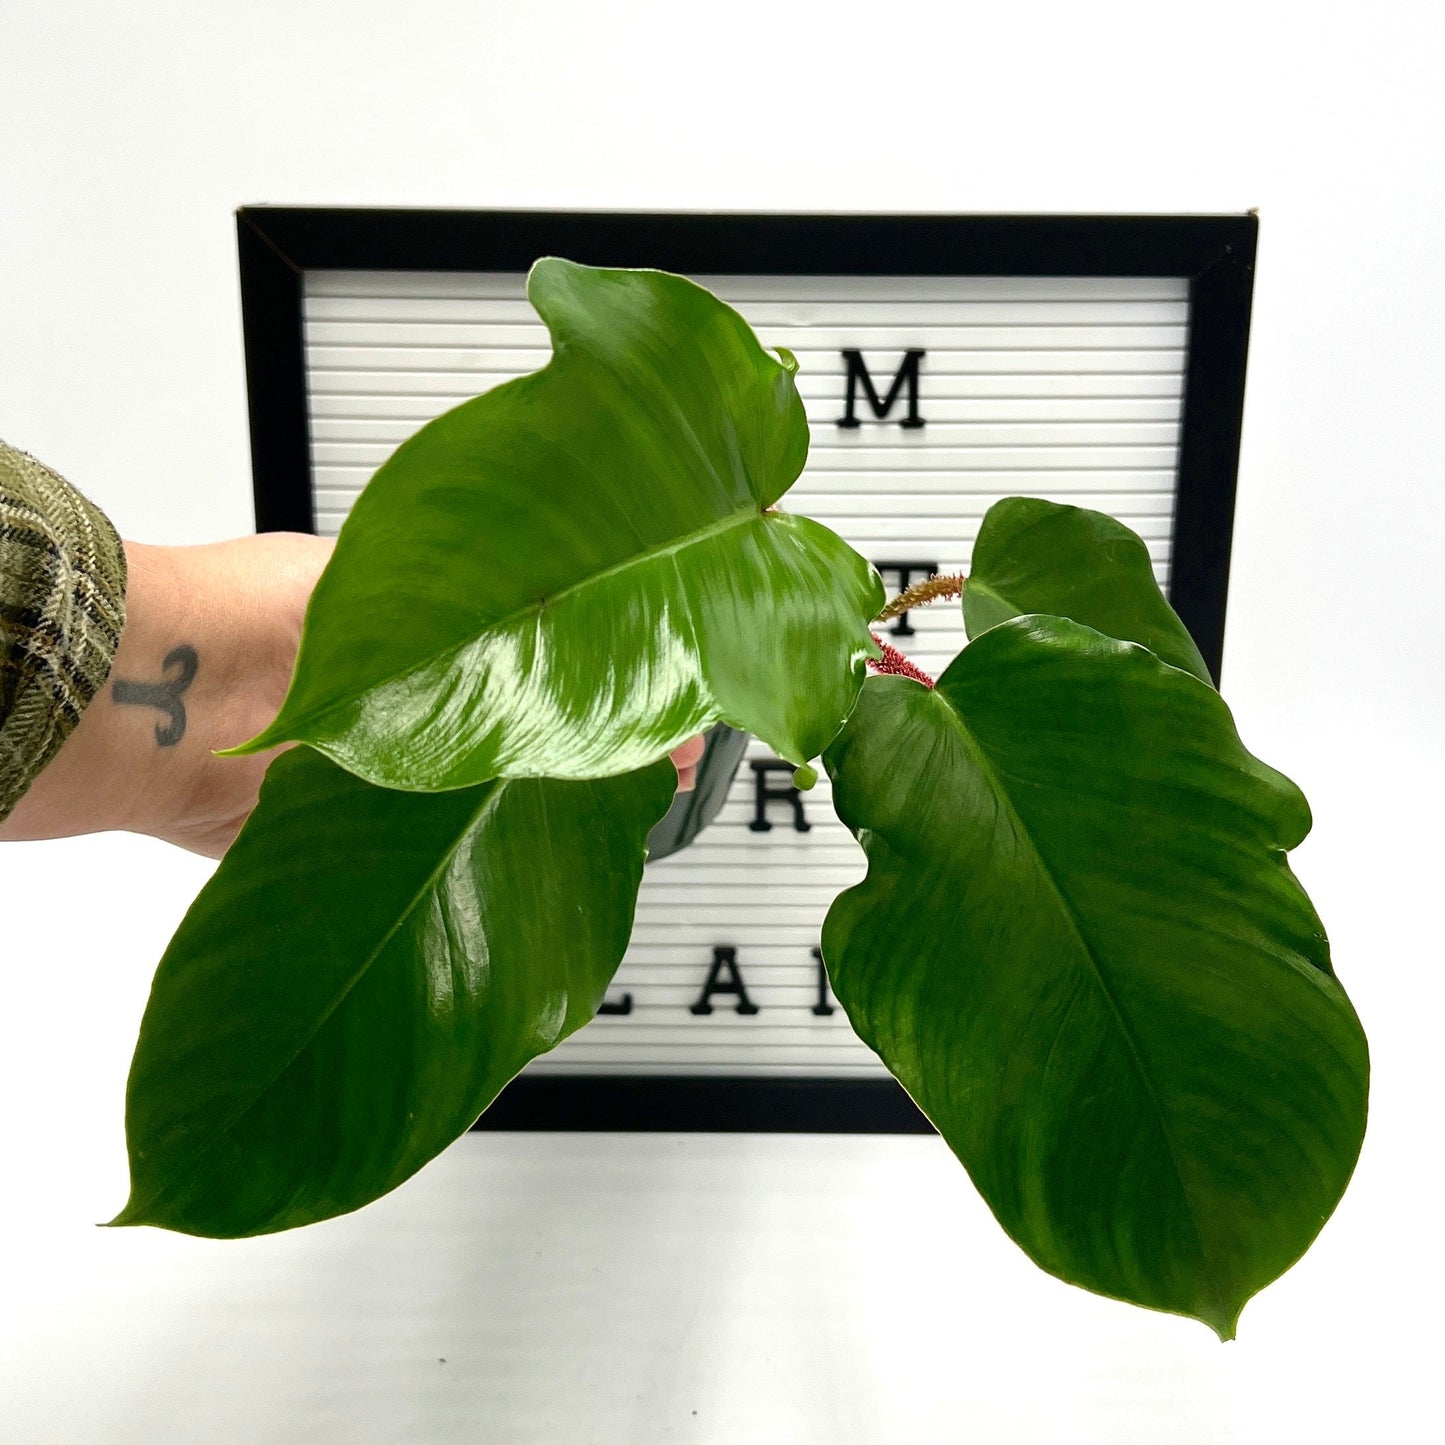 Philodendron Squamiferum by Elm Dirt